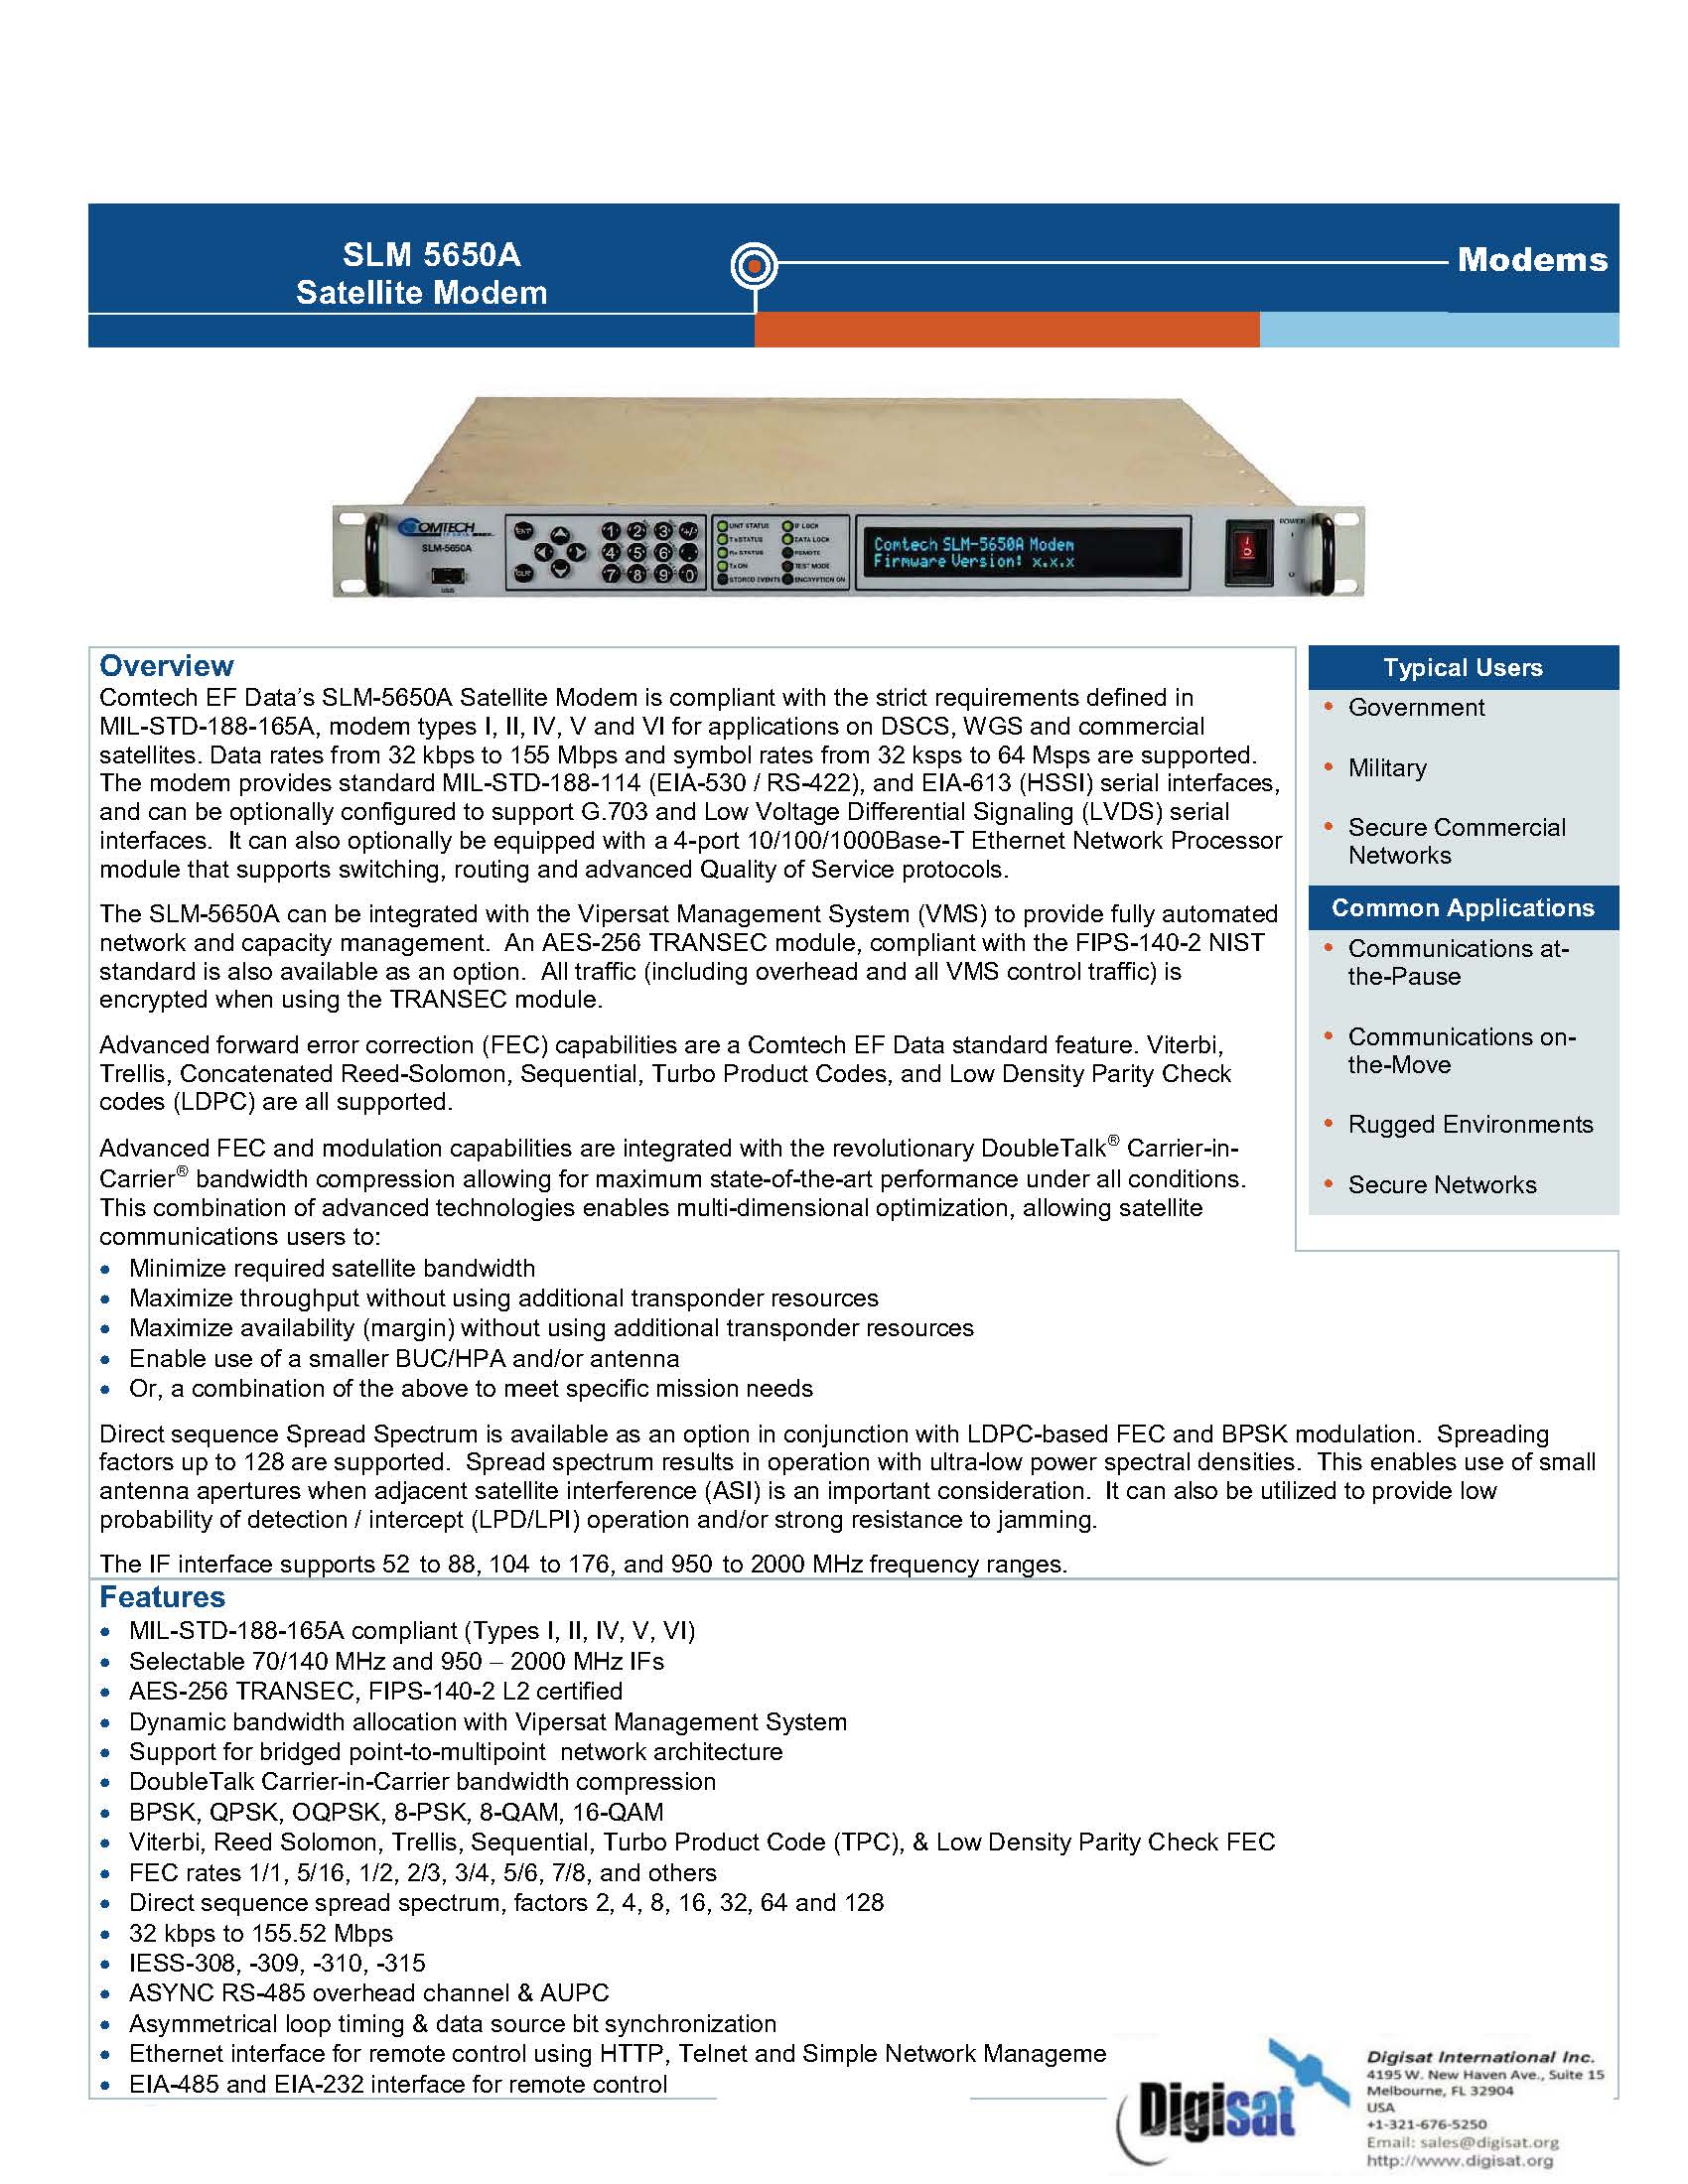 SLM-5650A specifications 1